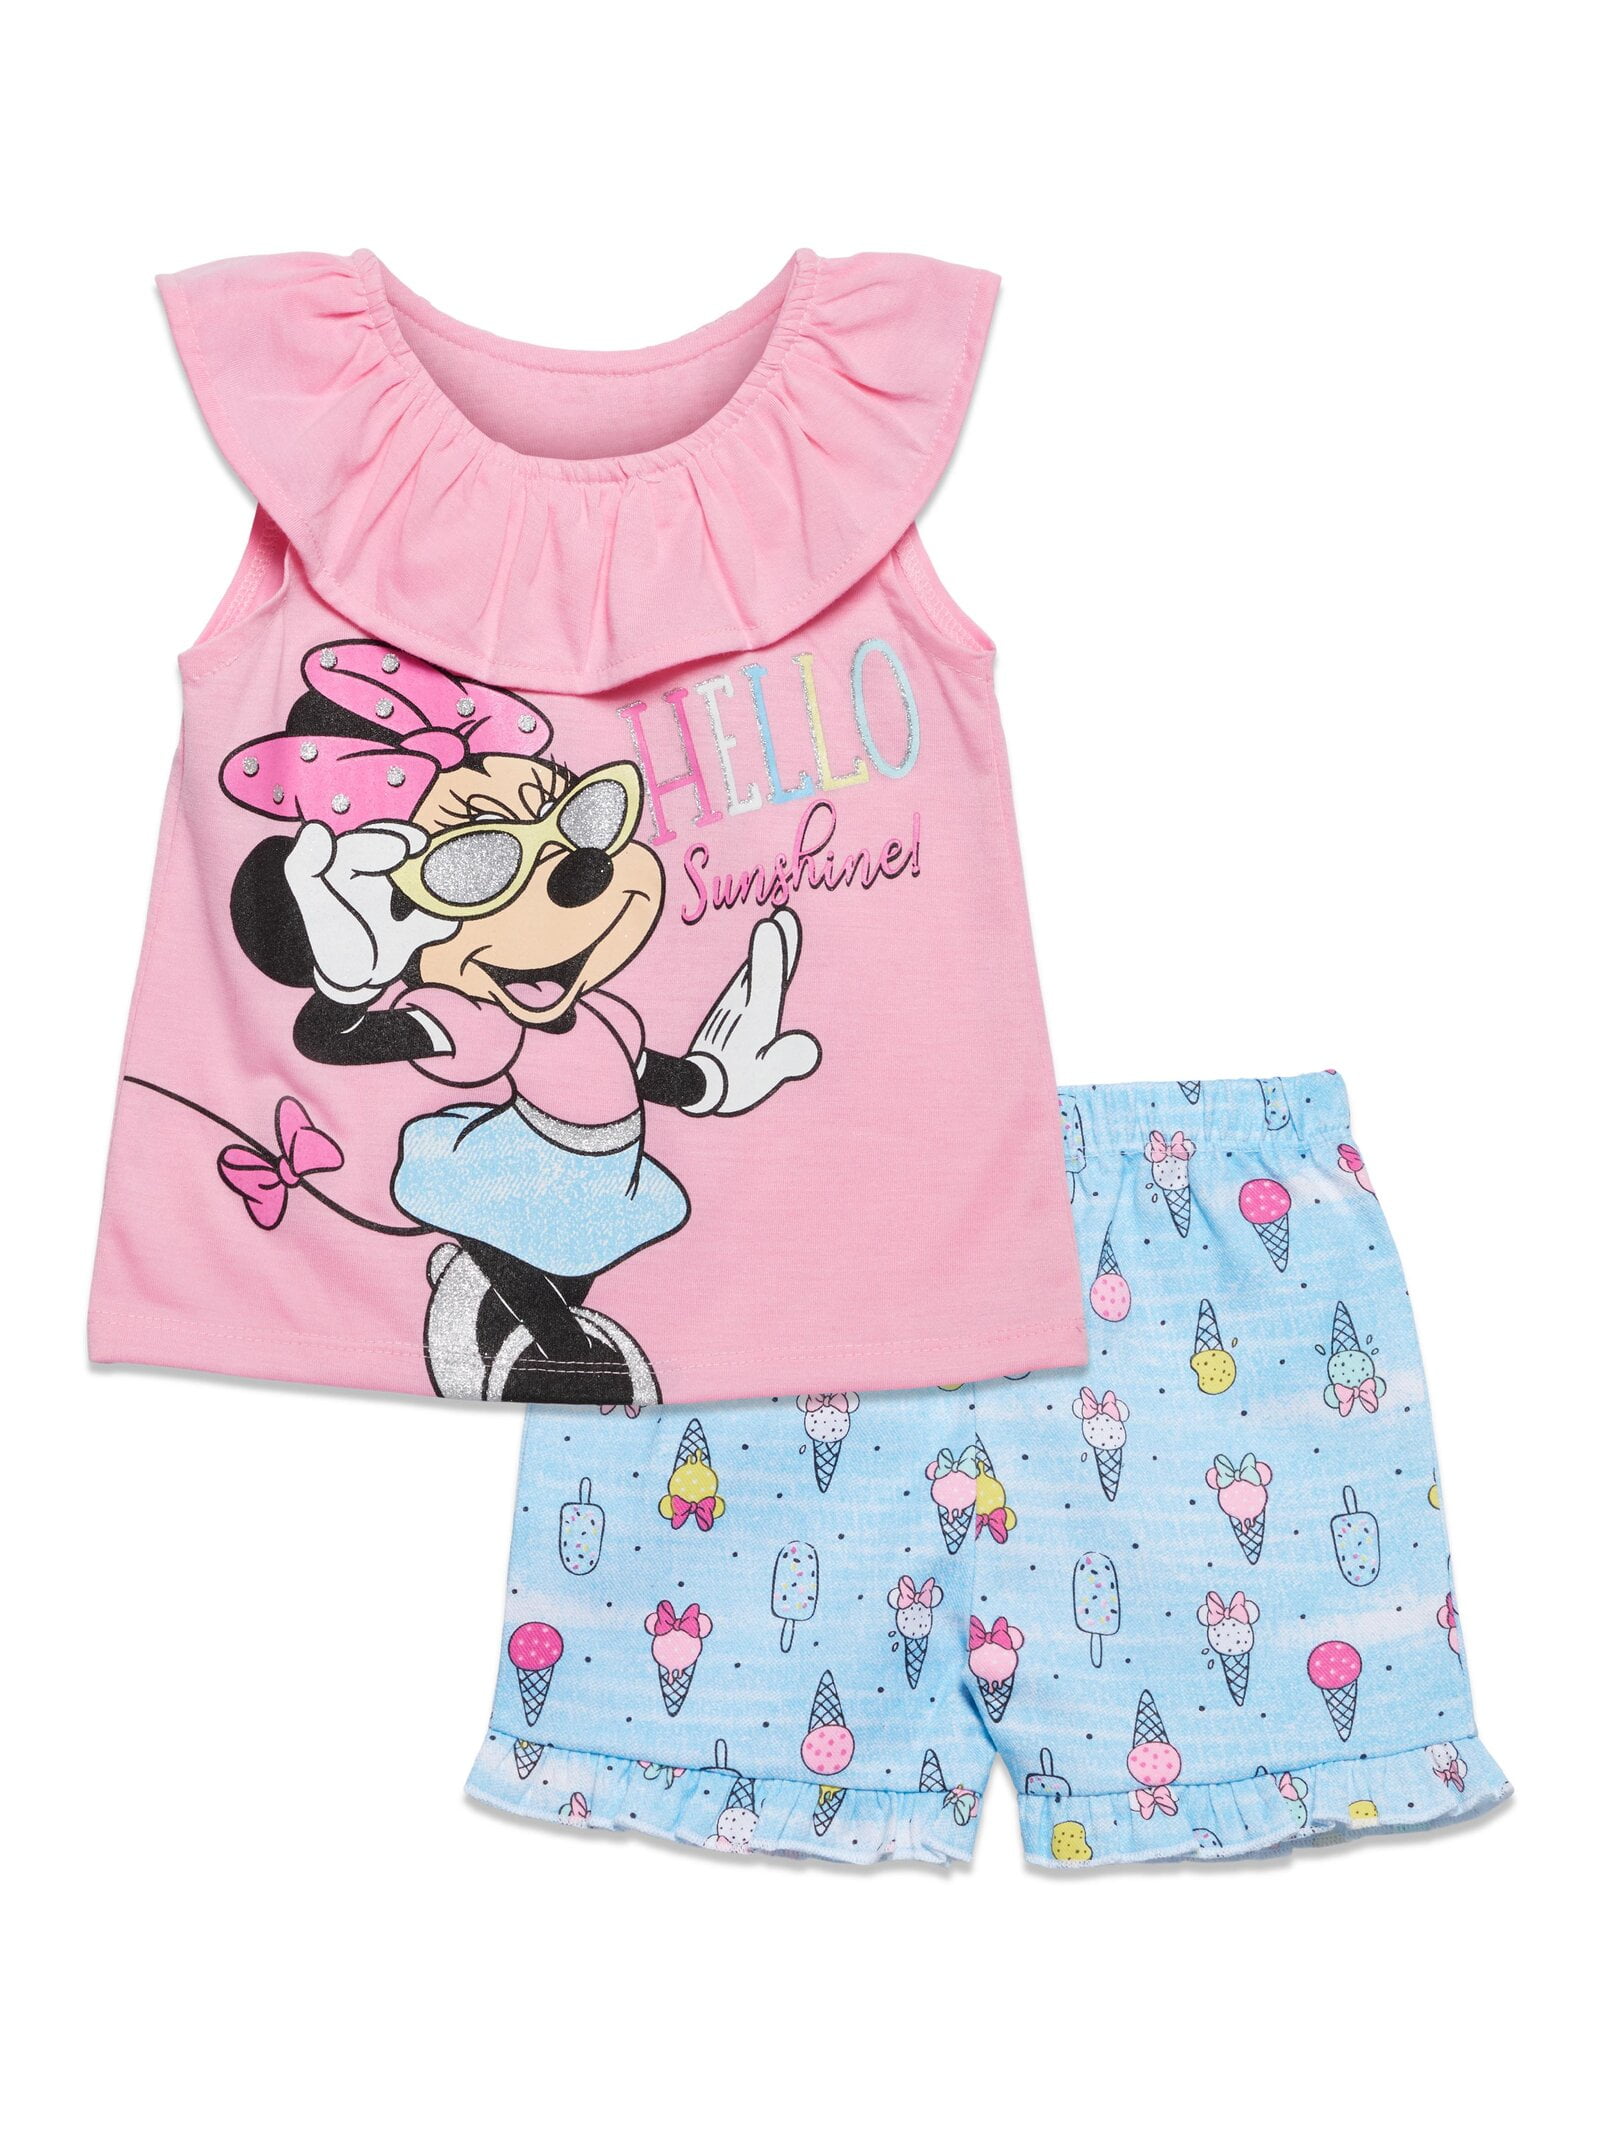 Disney Minnie Mouse Little Girls Crossover Tank Top and Shorts